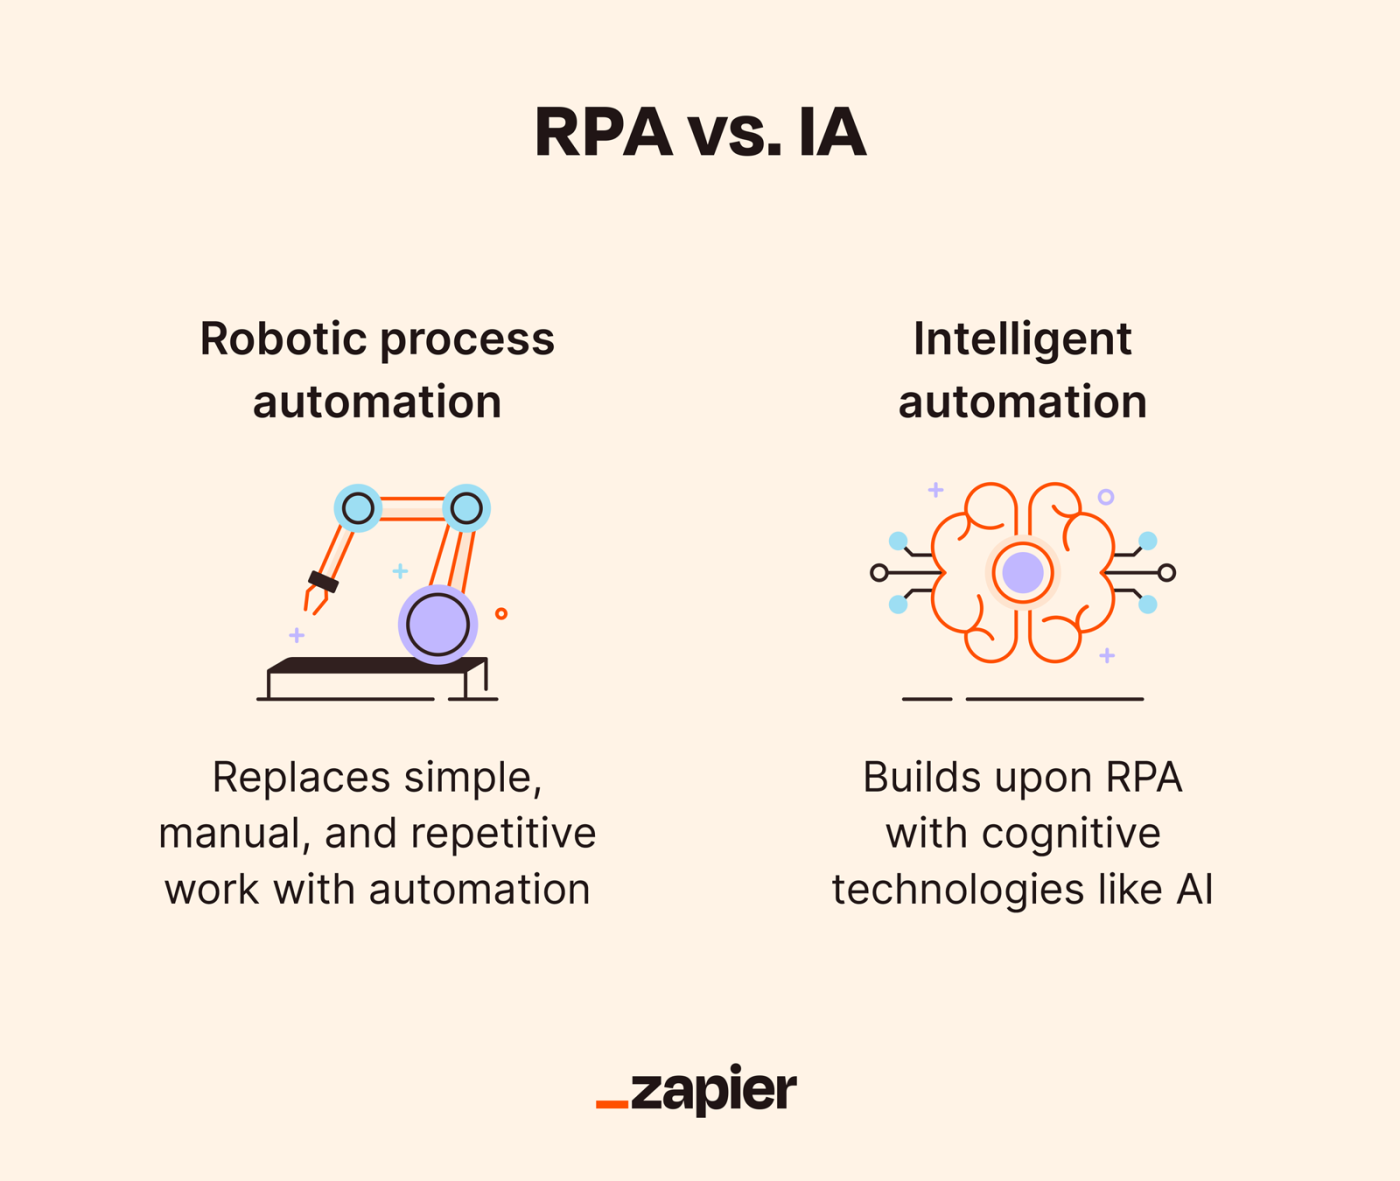 Illustration depicting the difference between intelligent automation and robotic process automation.